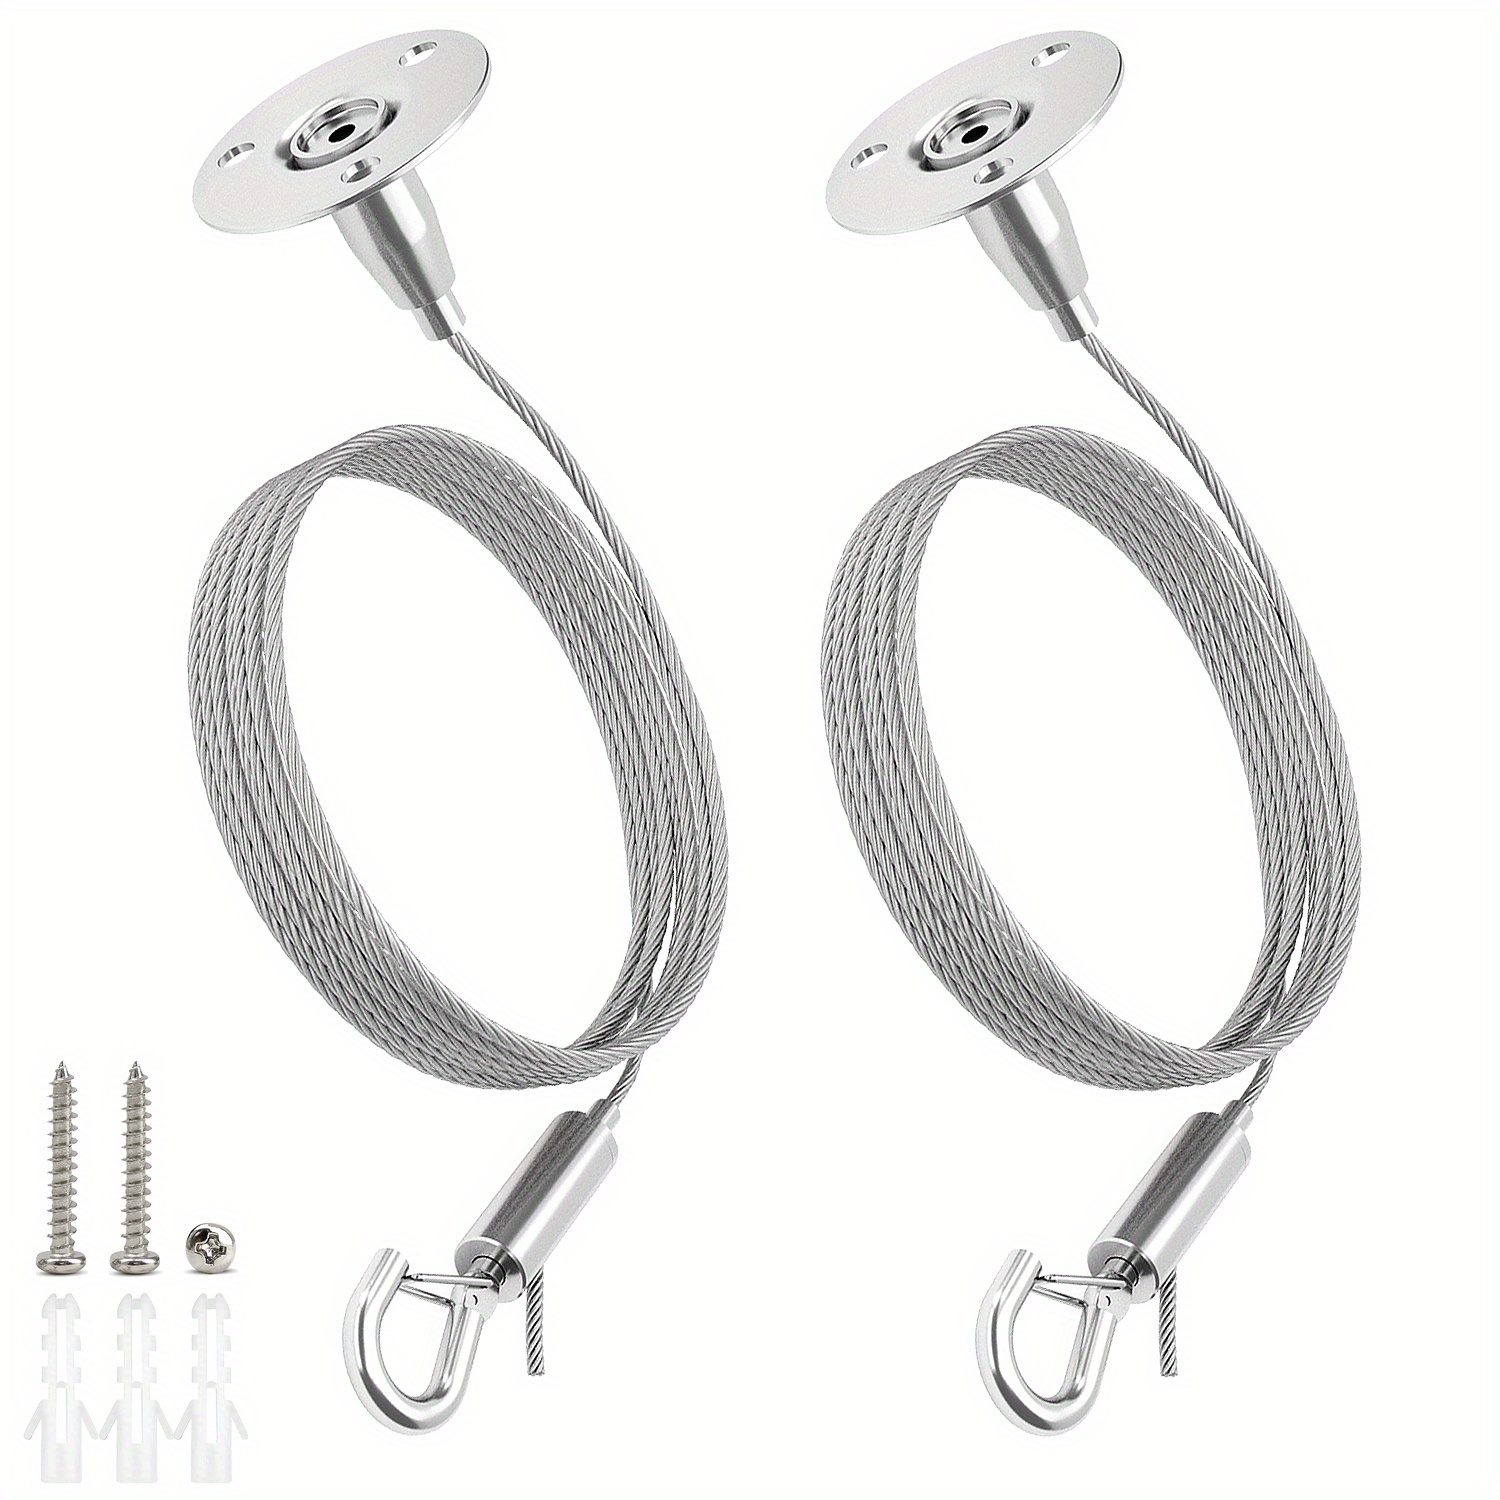 2pcs Stainless Steel Wire Rope For Hanging With Eyelets And Hook 2 Meter  Stainless Steel Rope Hanging Equipment Curtain Rope For Lamp Clothes Hanger  7